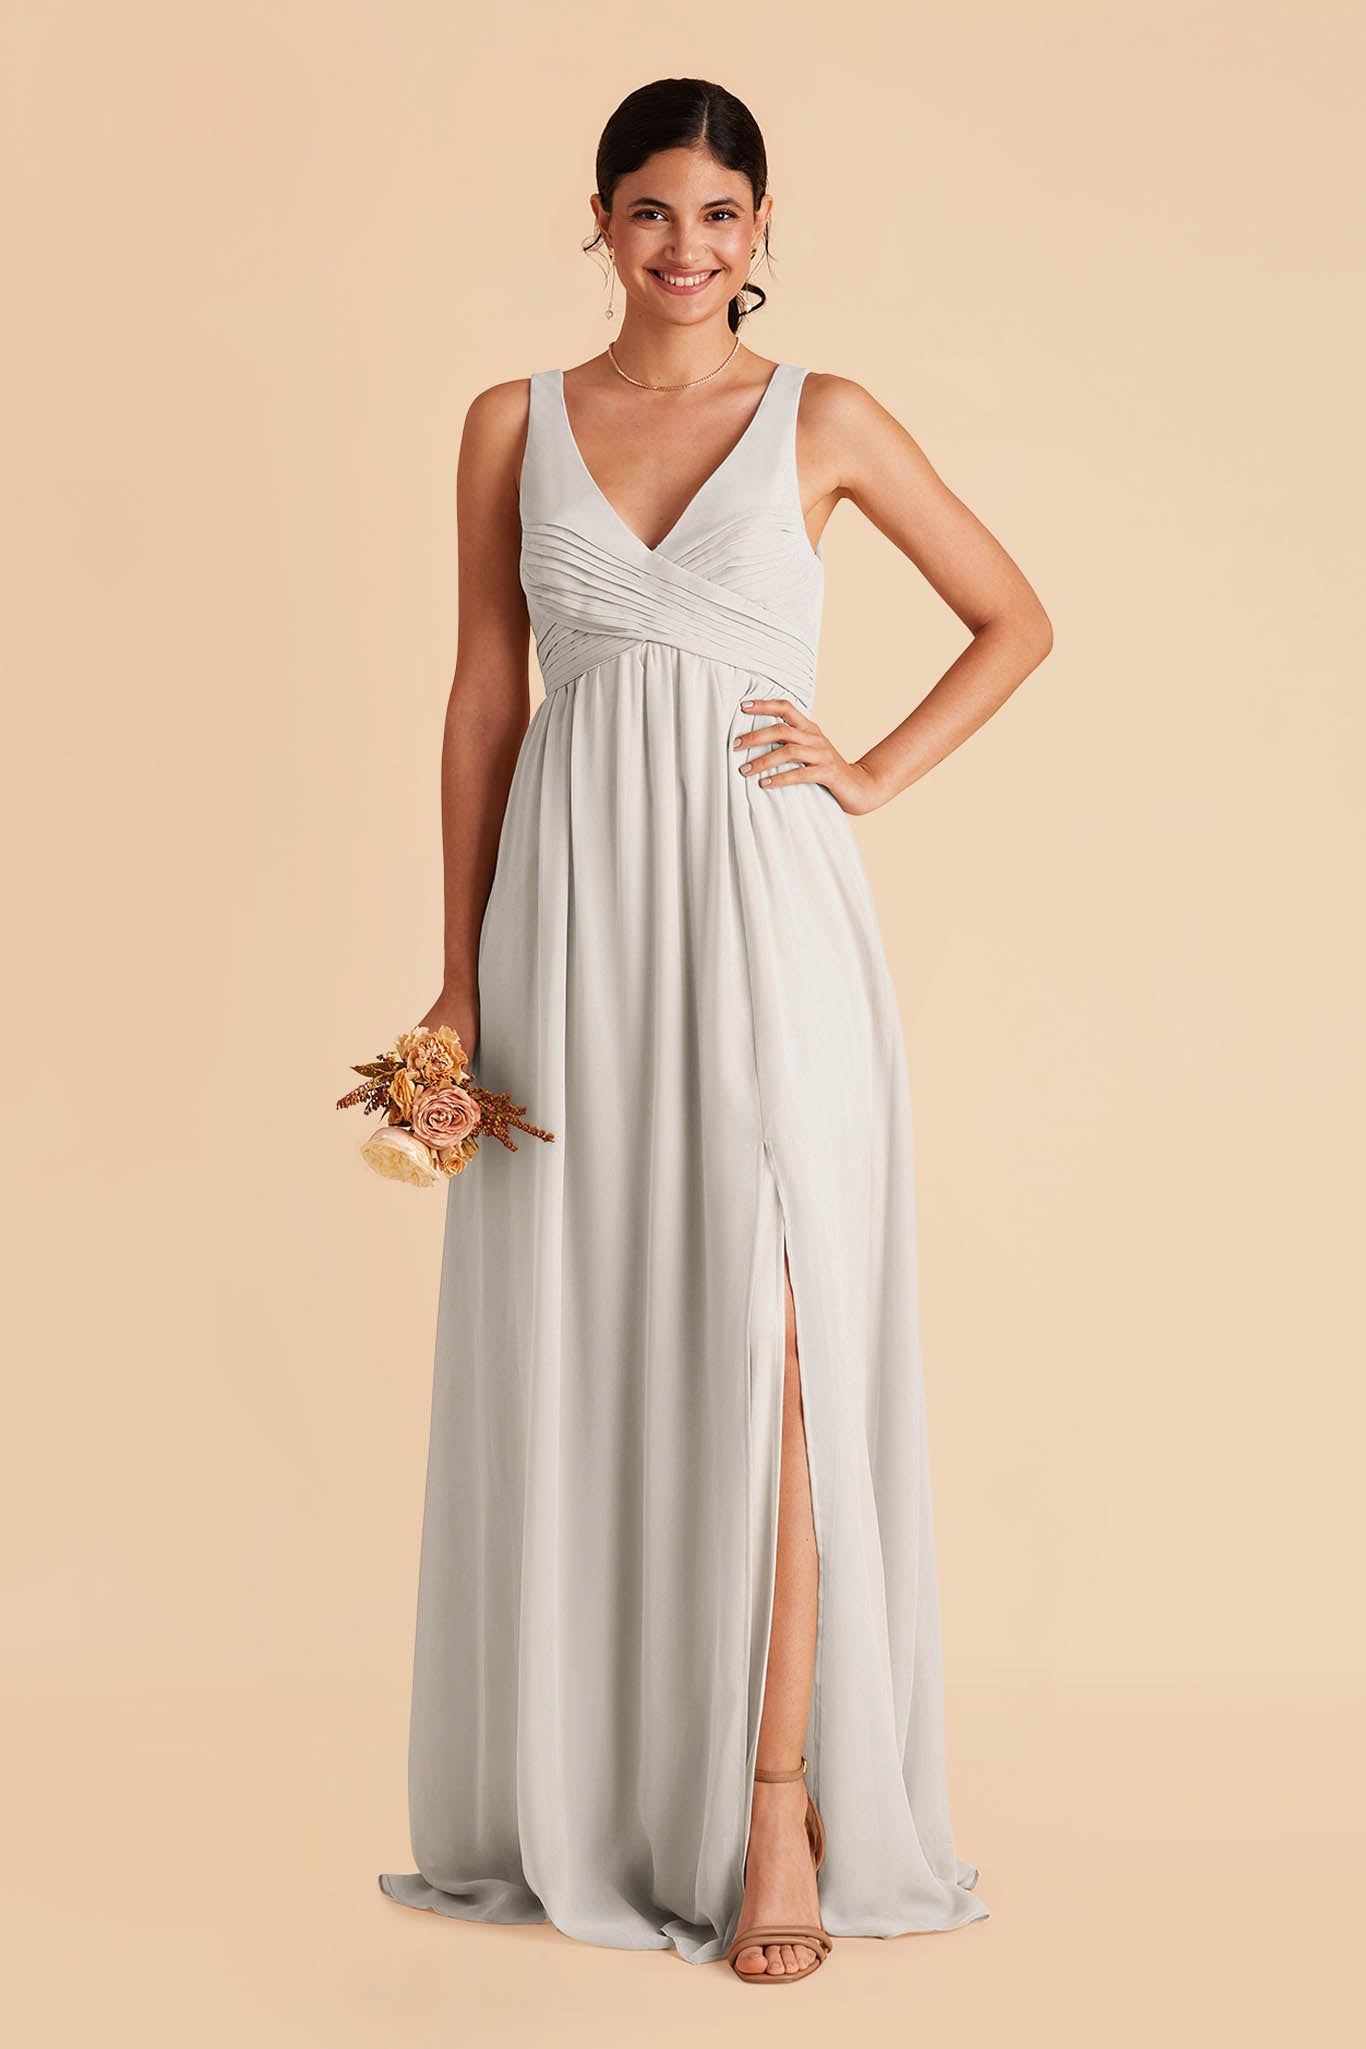 Dove Gray Laurie Empire Dress by Birdy Grey